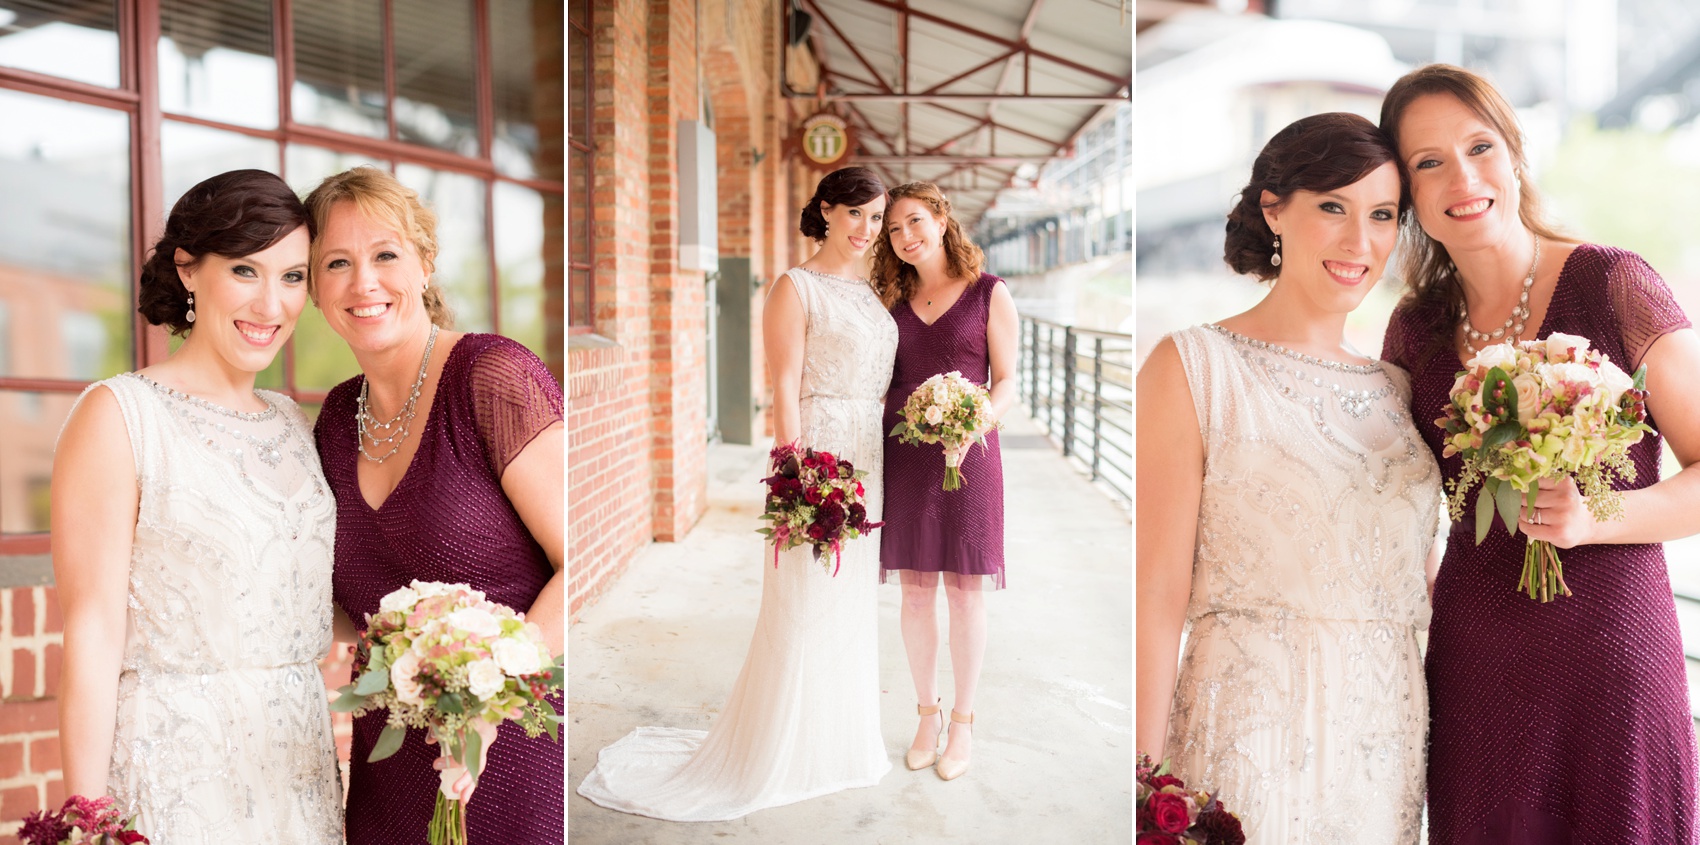 Bay 7 wedding photos by Mikkel Paige Photography. Raleigh wedding photographer captures the bridesmaids in beaded eggplant dresses.